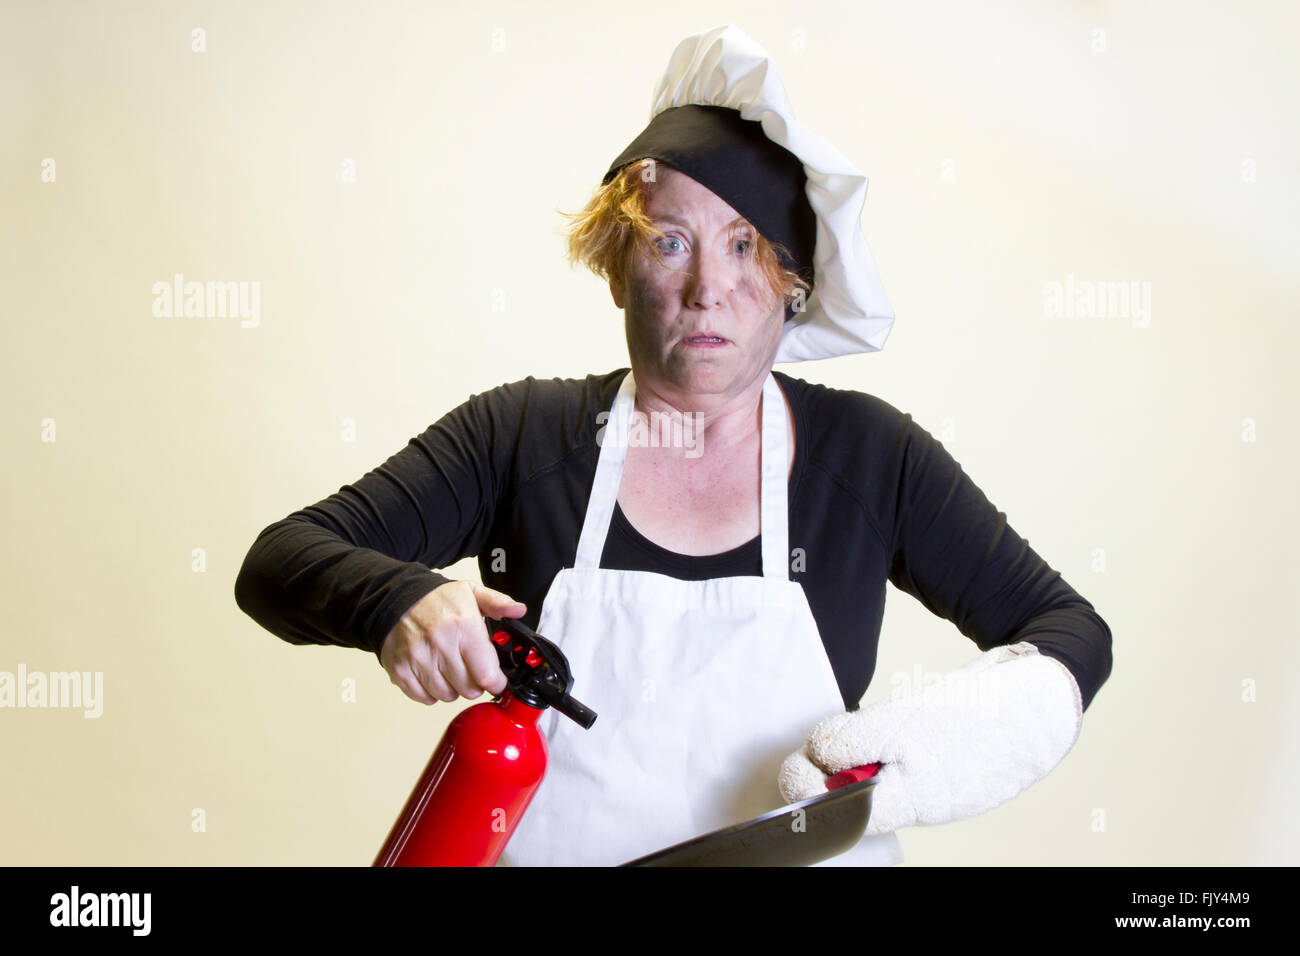 Mature woman with singed face holding pan and fire extinguisher with chefs hat and apron. Stock Photo